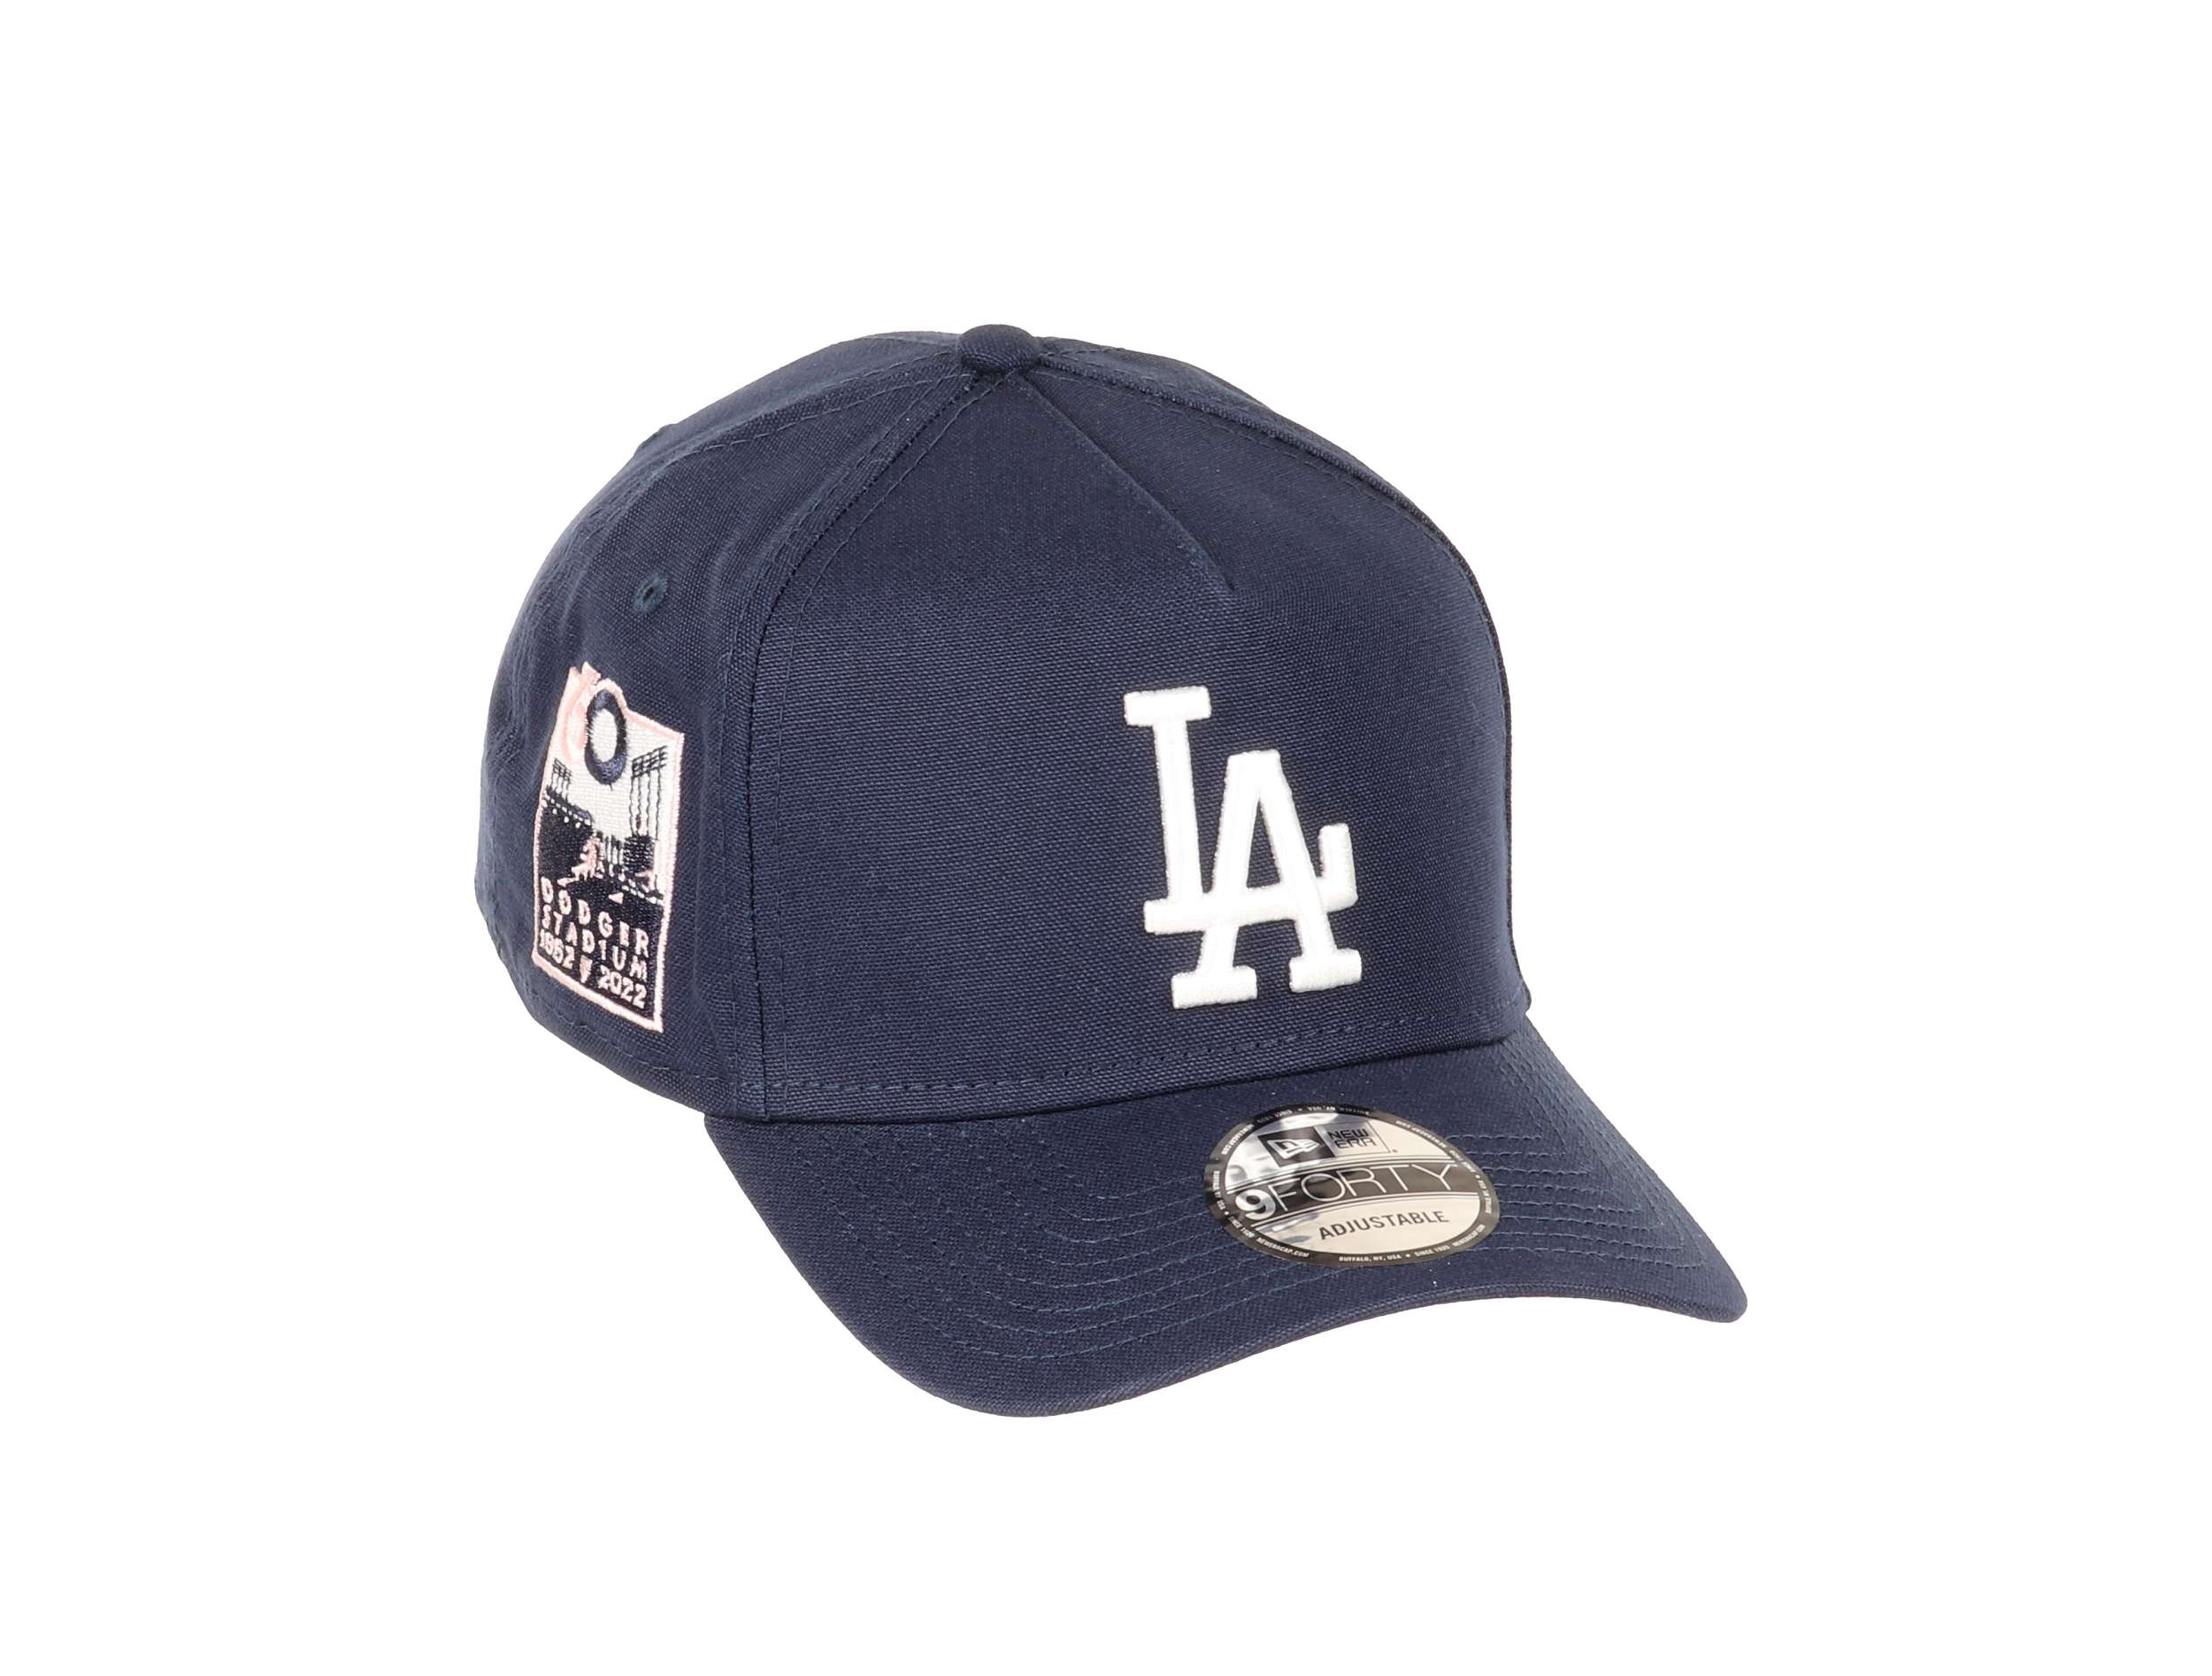 Los Angeles Dodgers MLB 60th Anniversary Dodgers StadiumSidepatch Ocean Pink Rouge 9Forty A-Frame Snapback Cap New Era